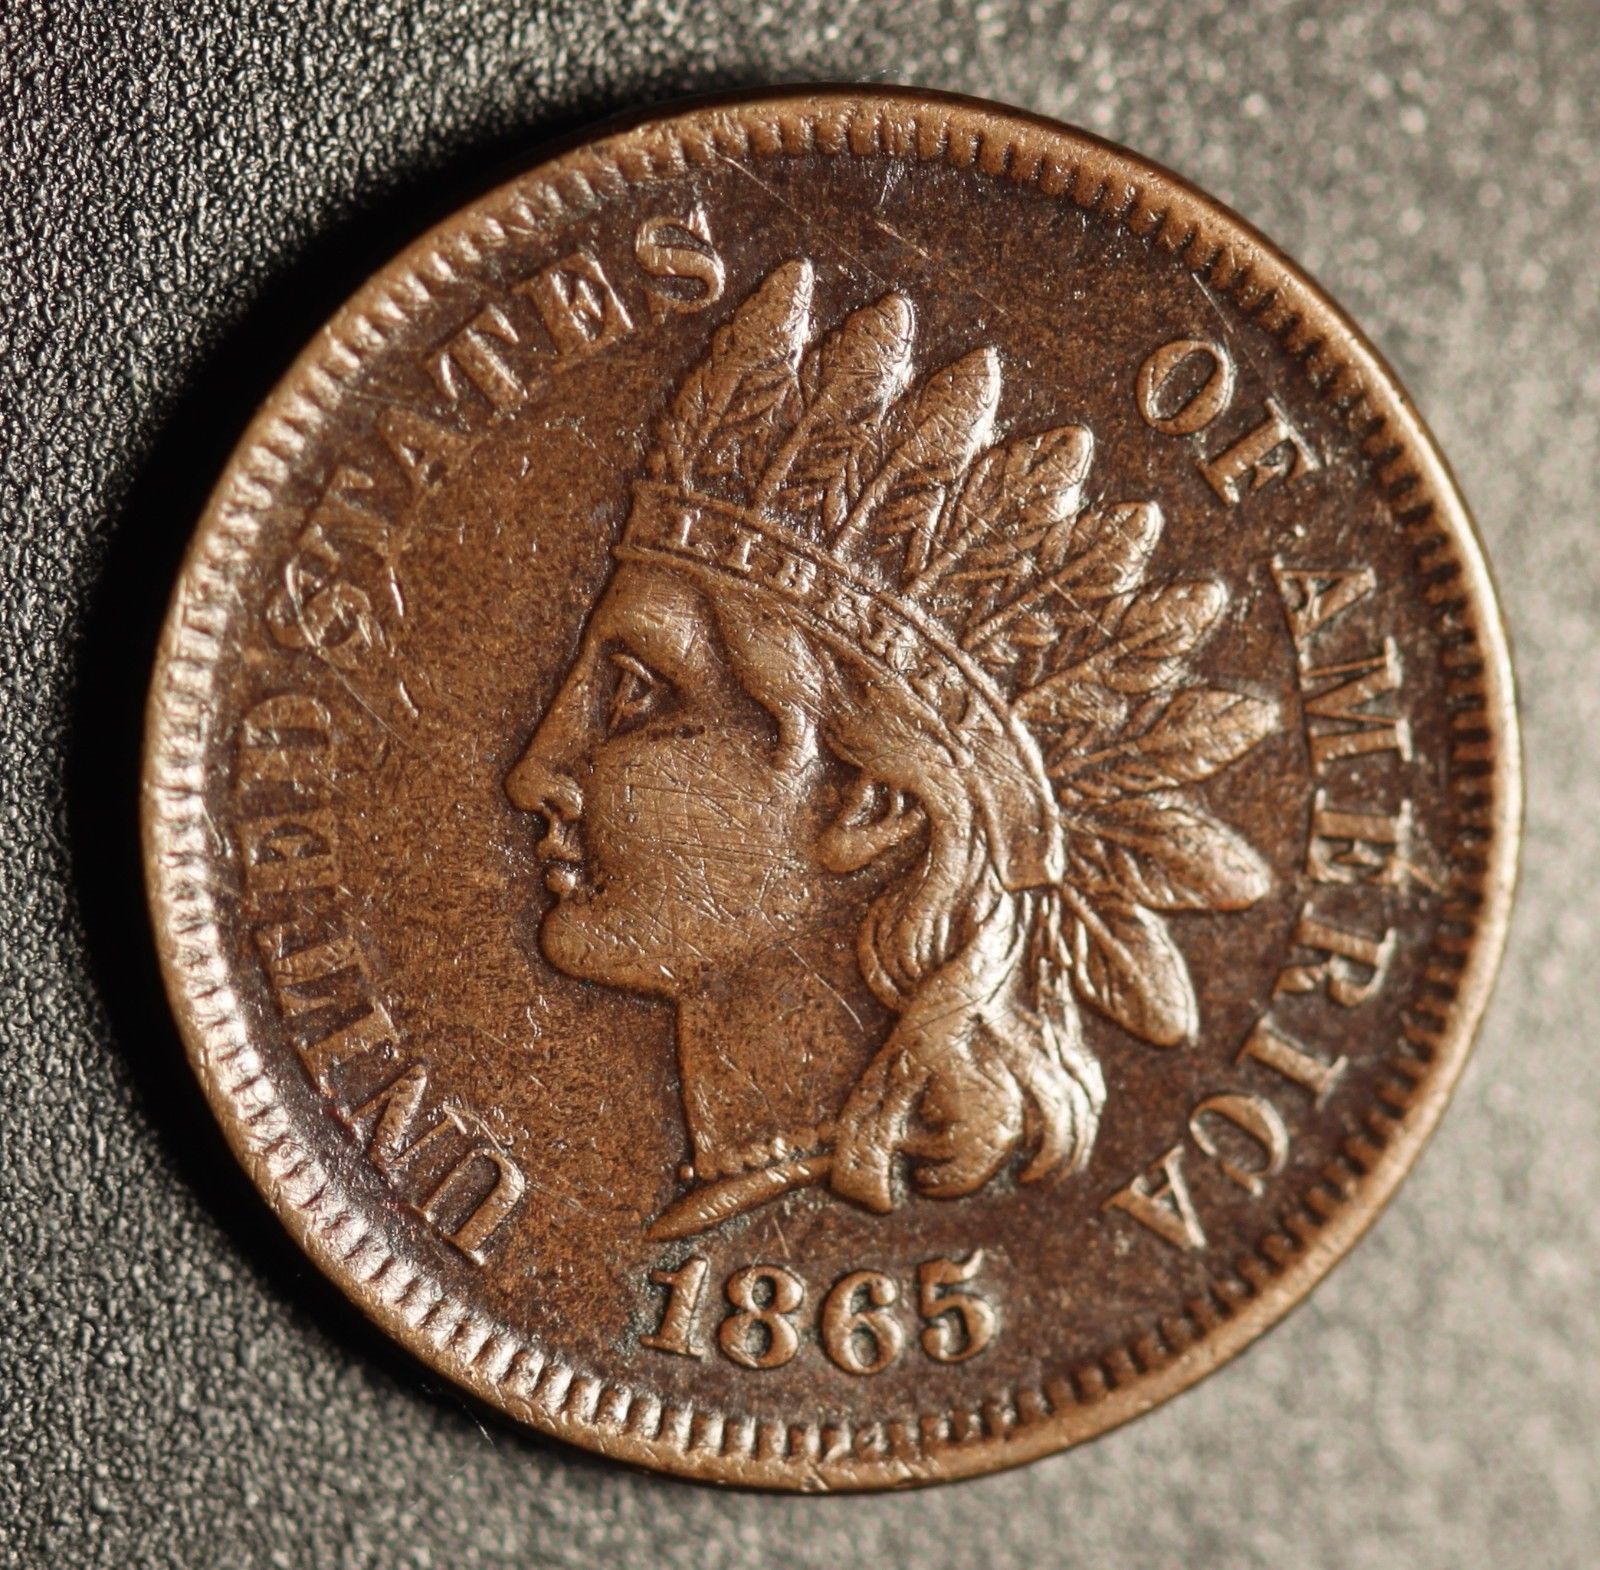 1865 ODD-002 Indian Head Penny – Photo by Ed Nathanson